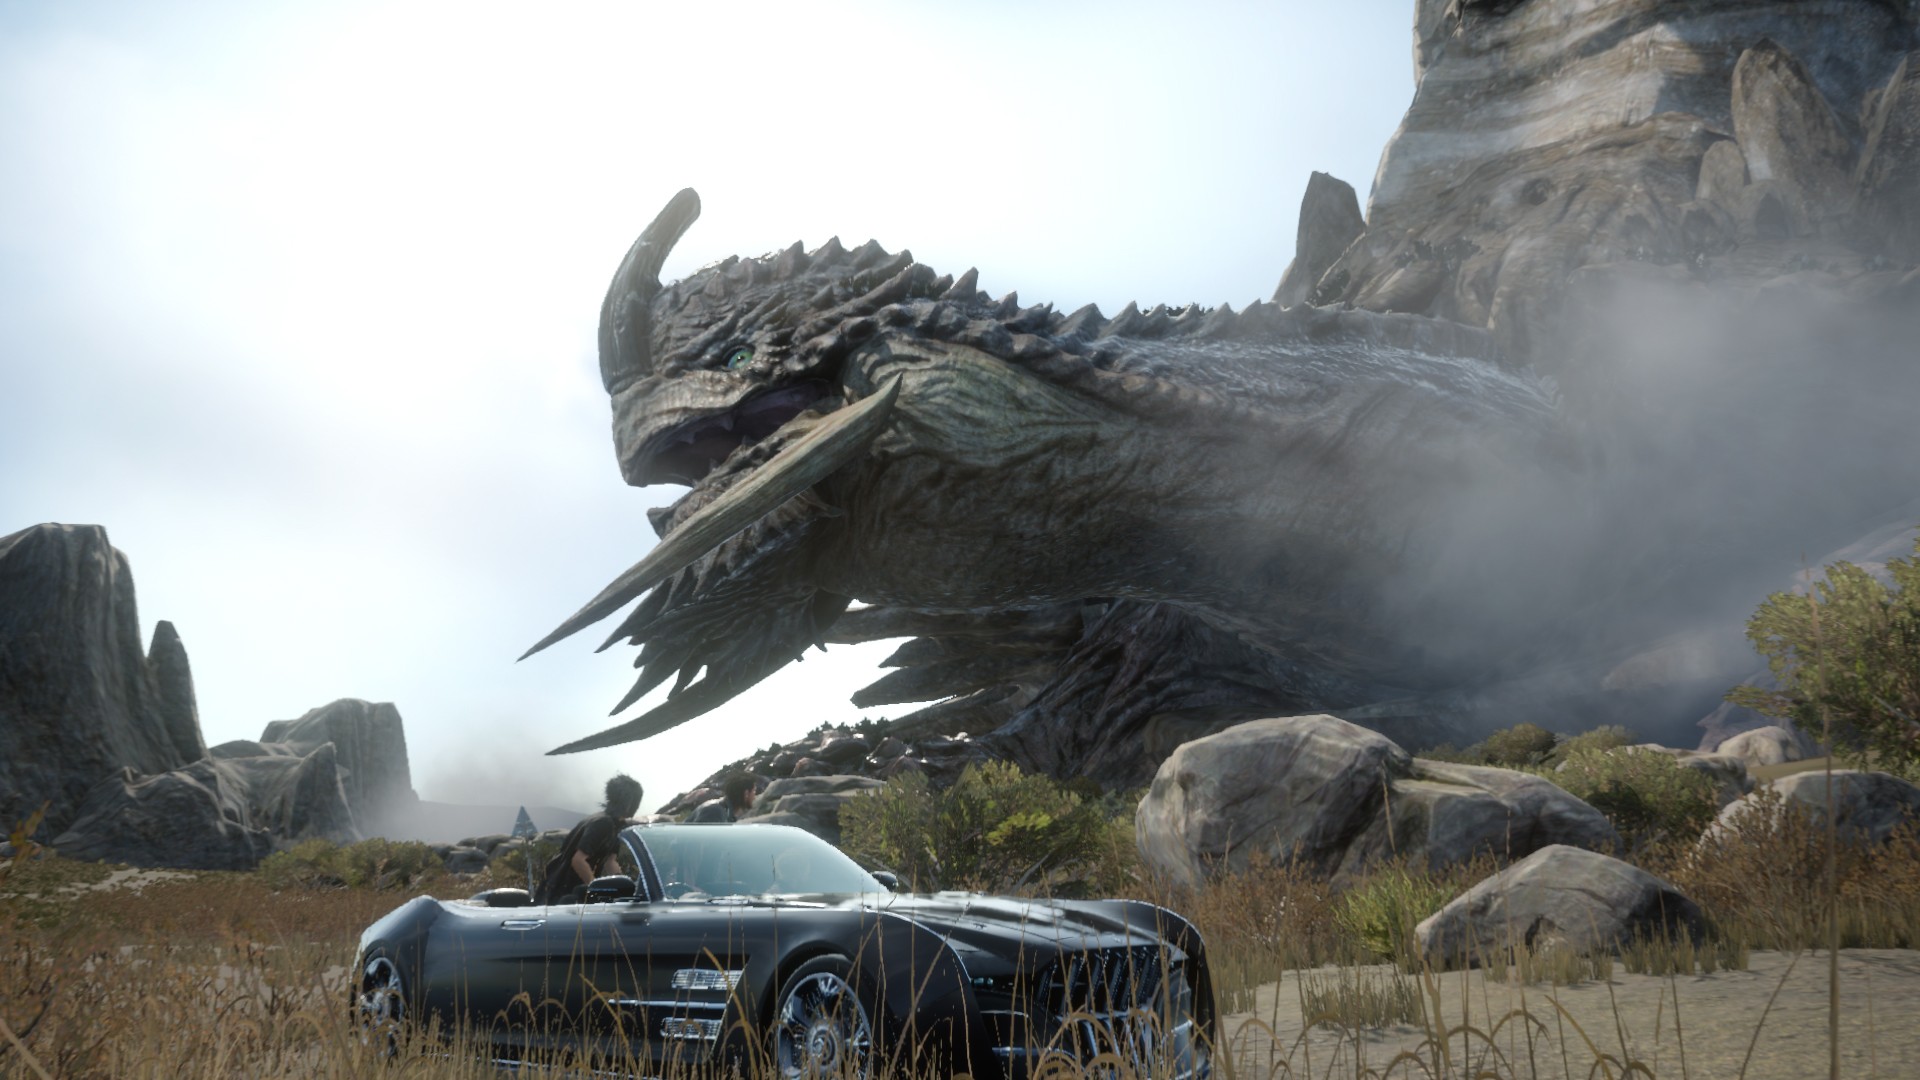 Final Fantasy Xv Demo Confirmed New Tgs Trailer Out Video